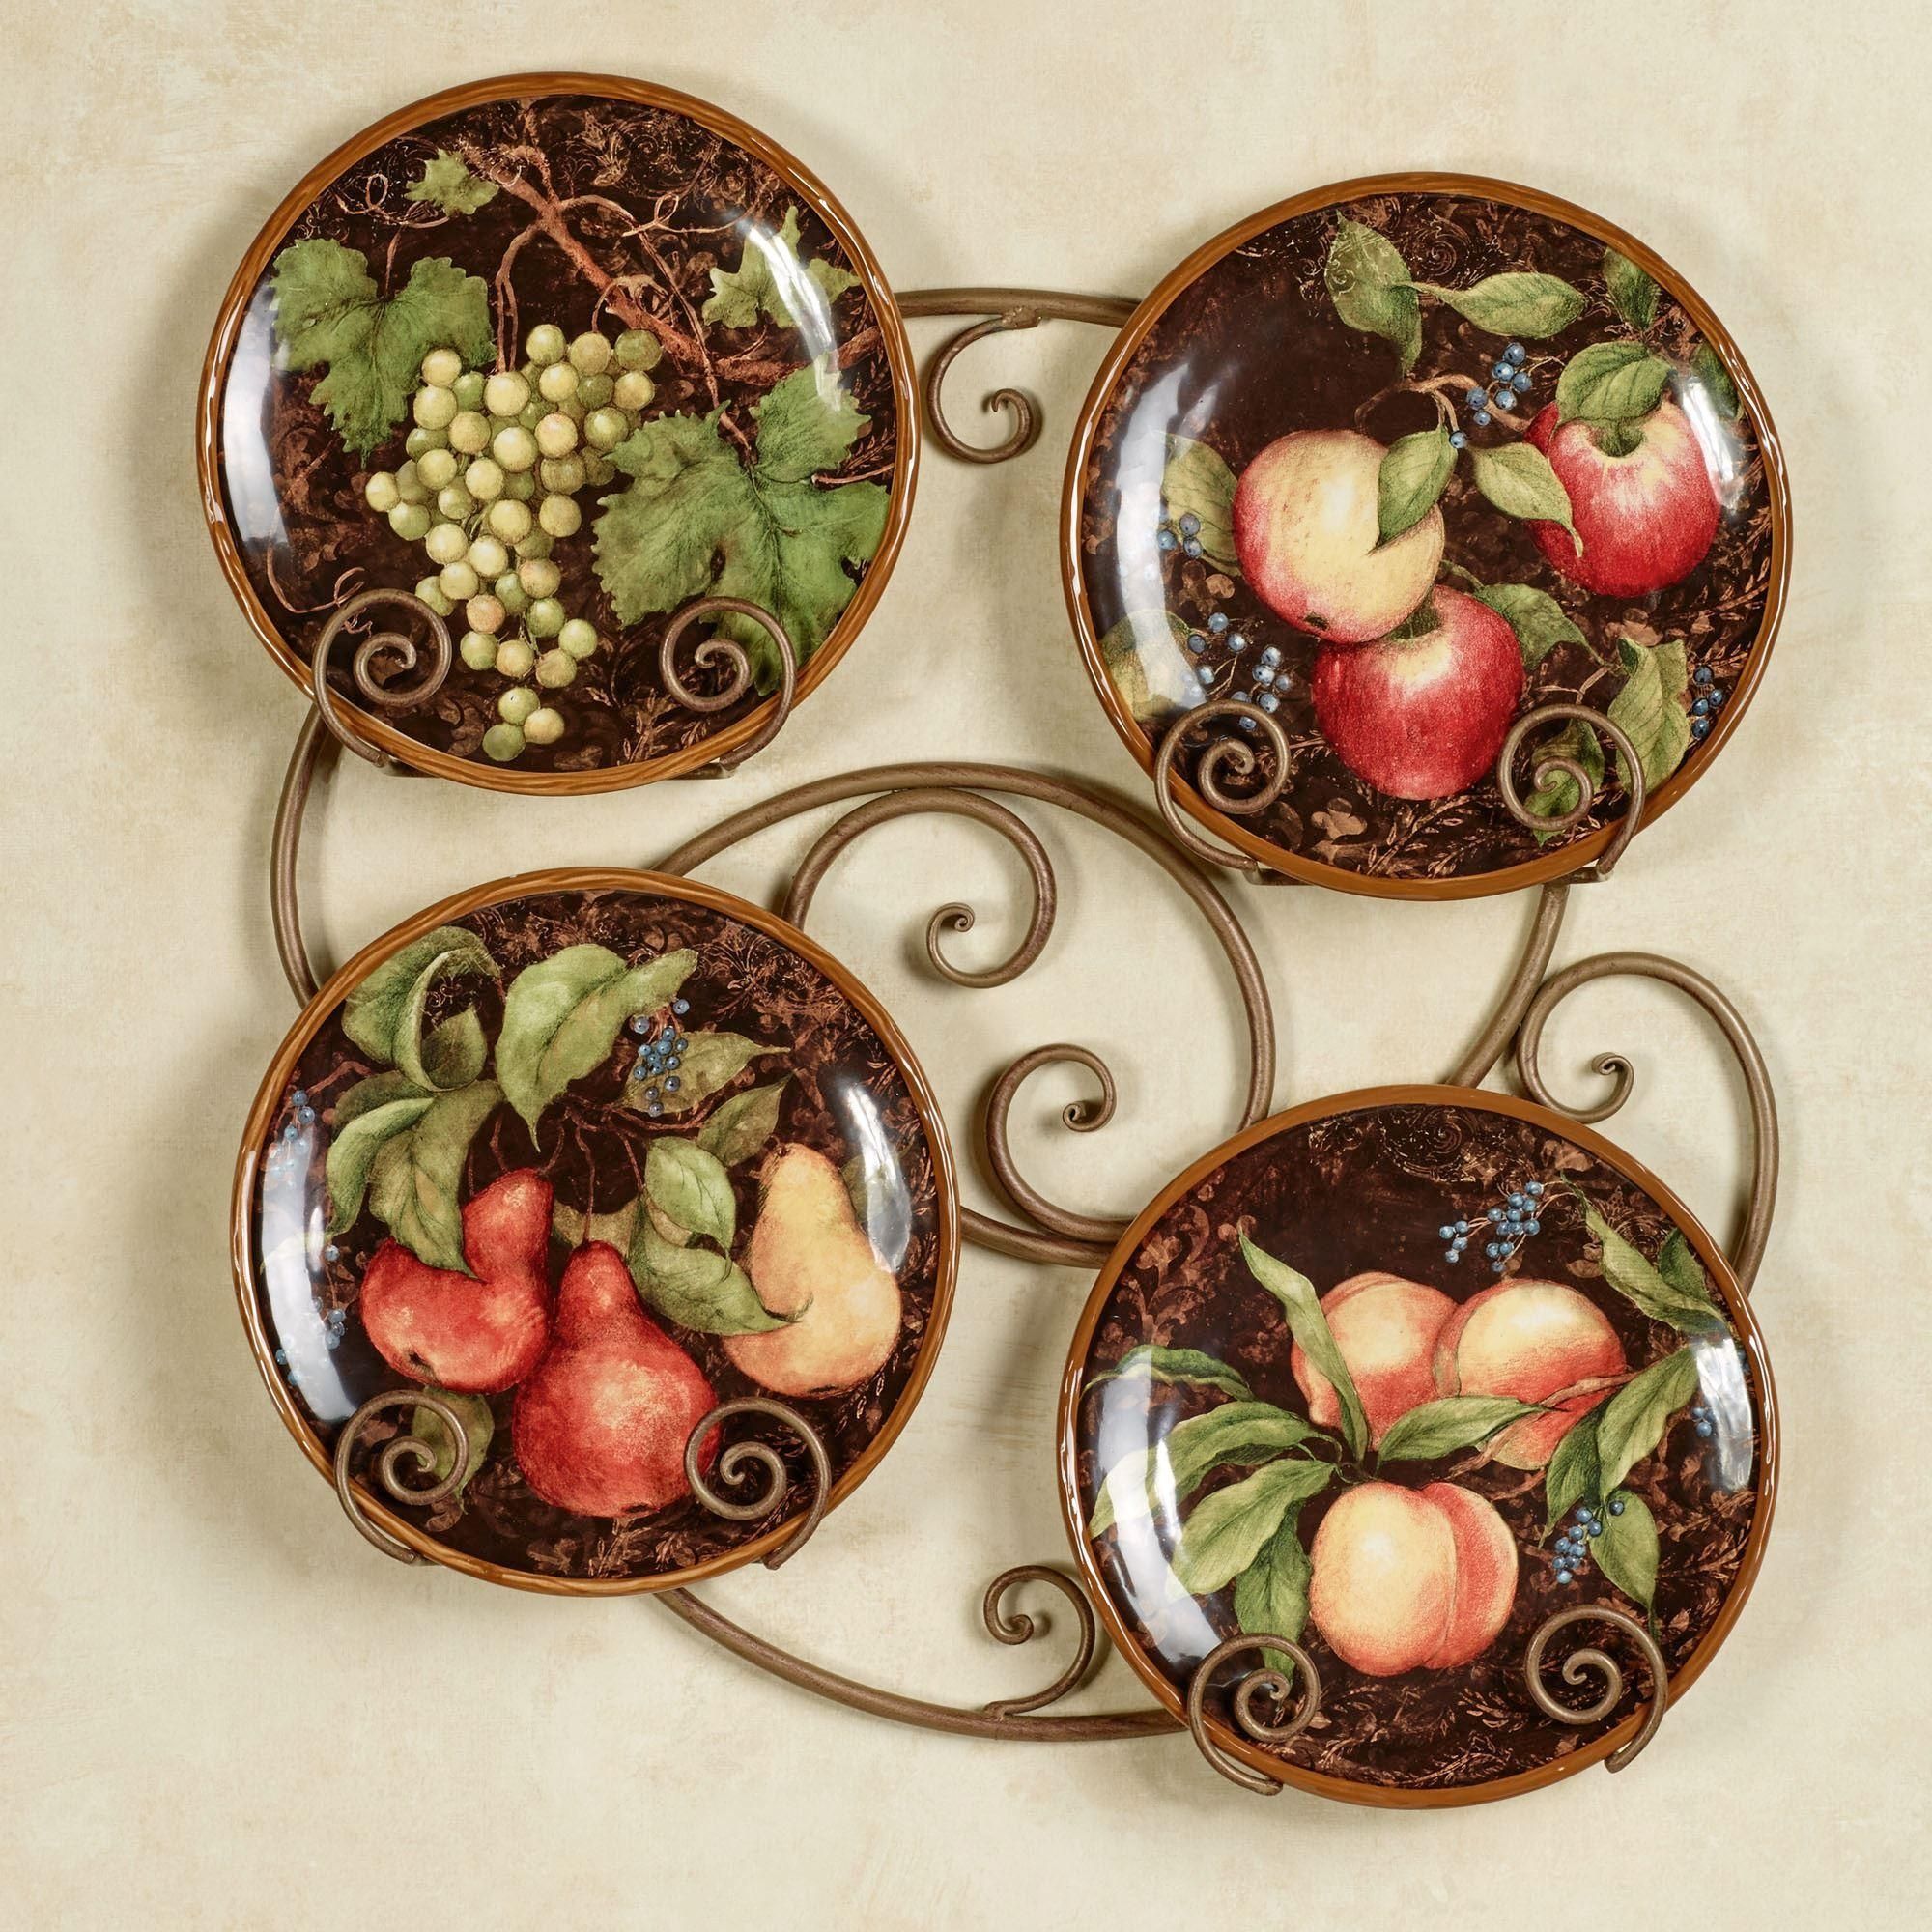 Tuscan And Italian Home Decor | Touch Of Class Regarding Midnight Italian Plates Wall Art (View 2 of 20)